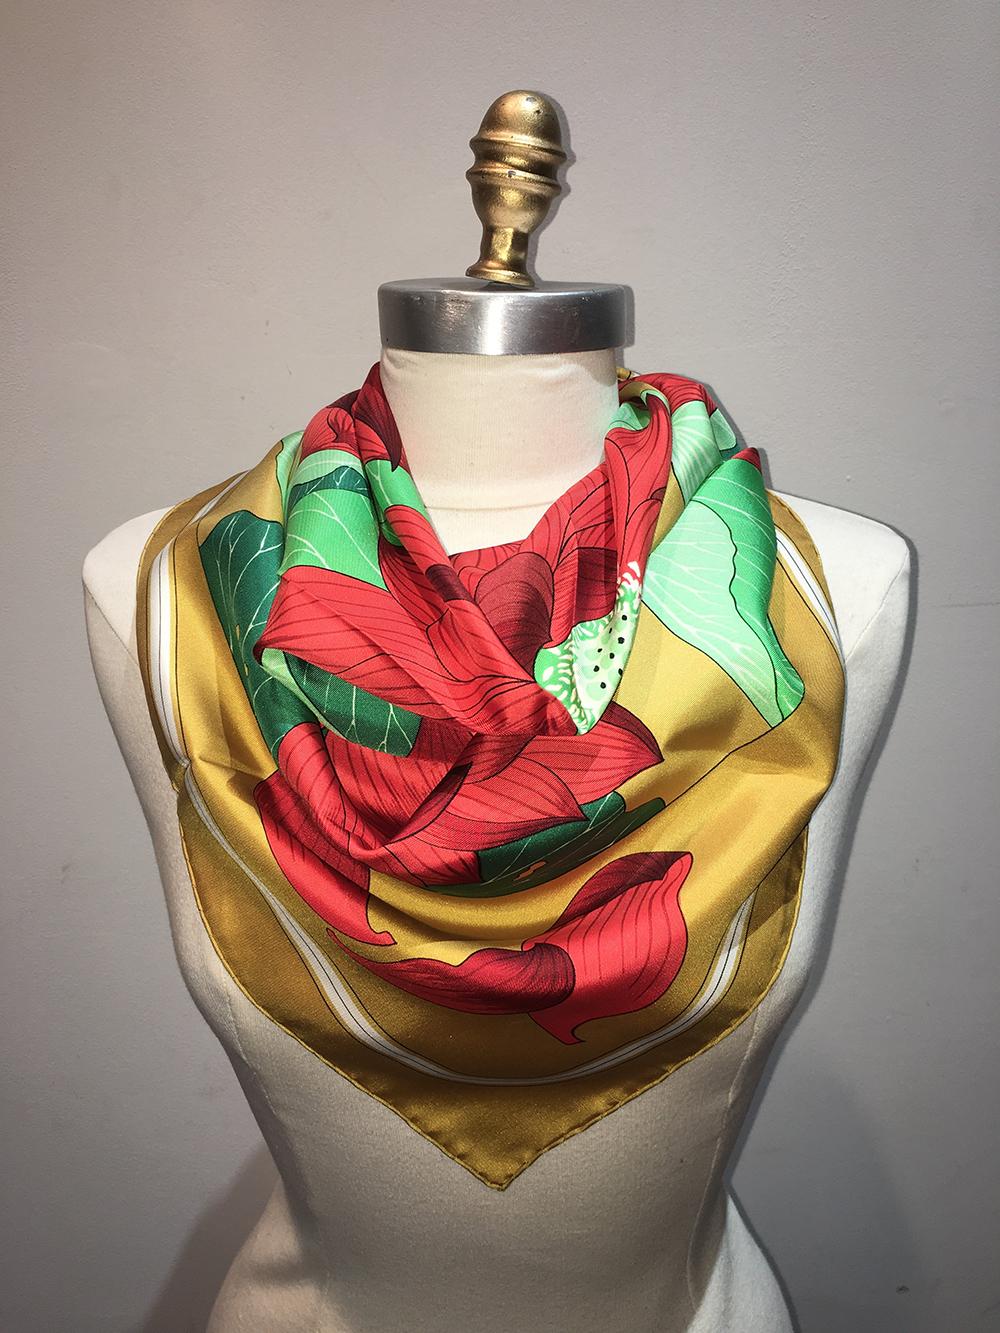 Hermes Vintage Fleurs de Lotus Silk Scarf in Gold c1970s in excellent condition. Original silk screen design c1976 by Christiane Vauzelles features a beautiful assortment of red lotus flowers with green leaves in a circle pattern over a marigold